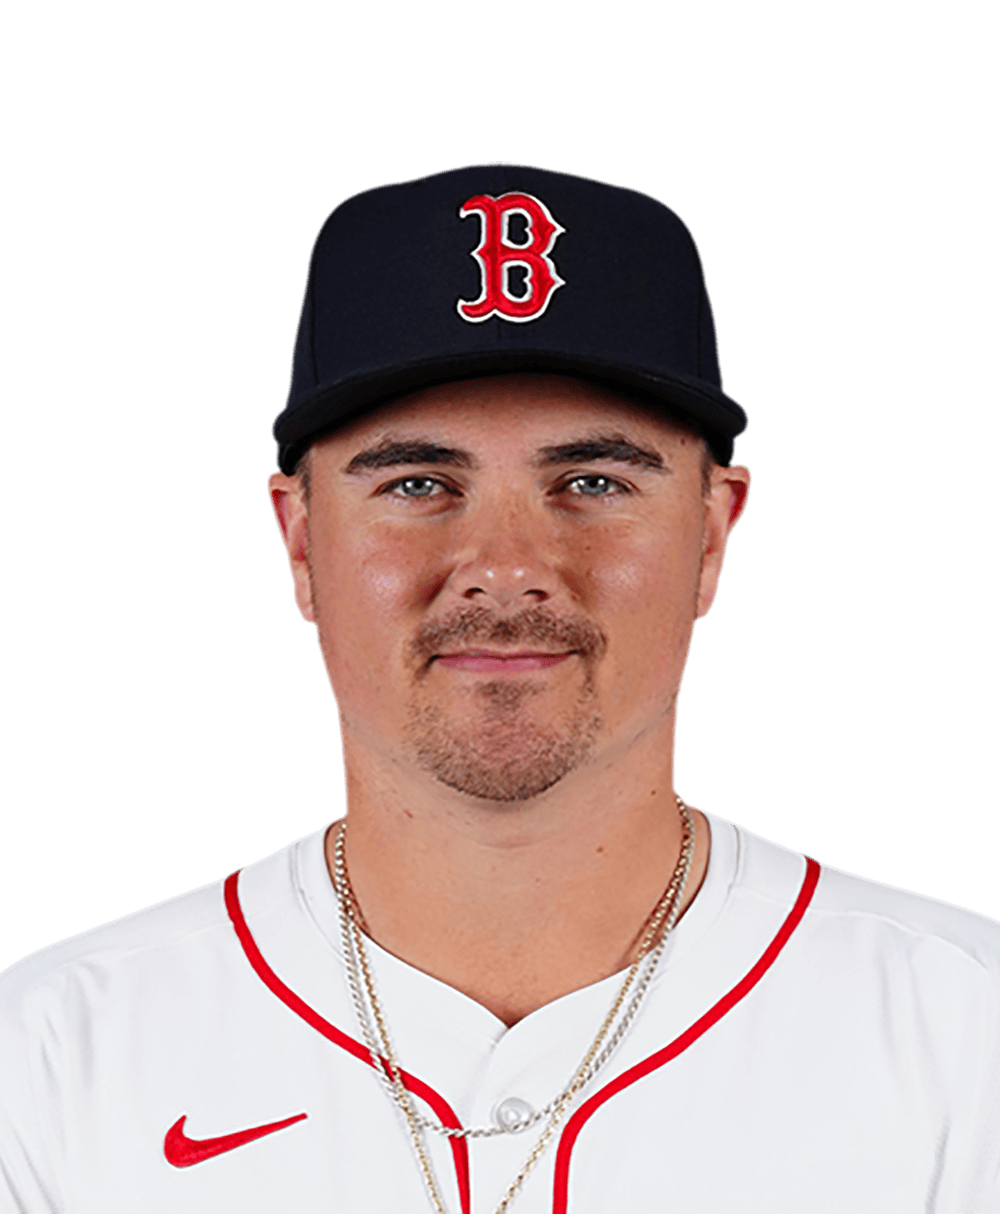 Connor Wong - MLB Catcher - News, Stats, Bio and more - The Athletic